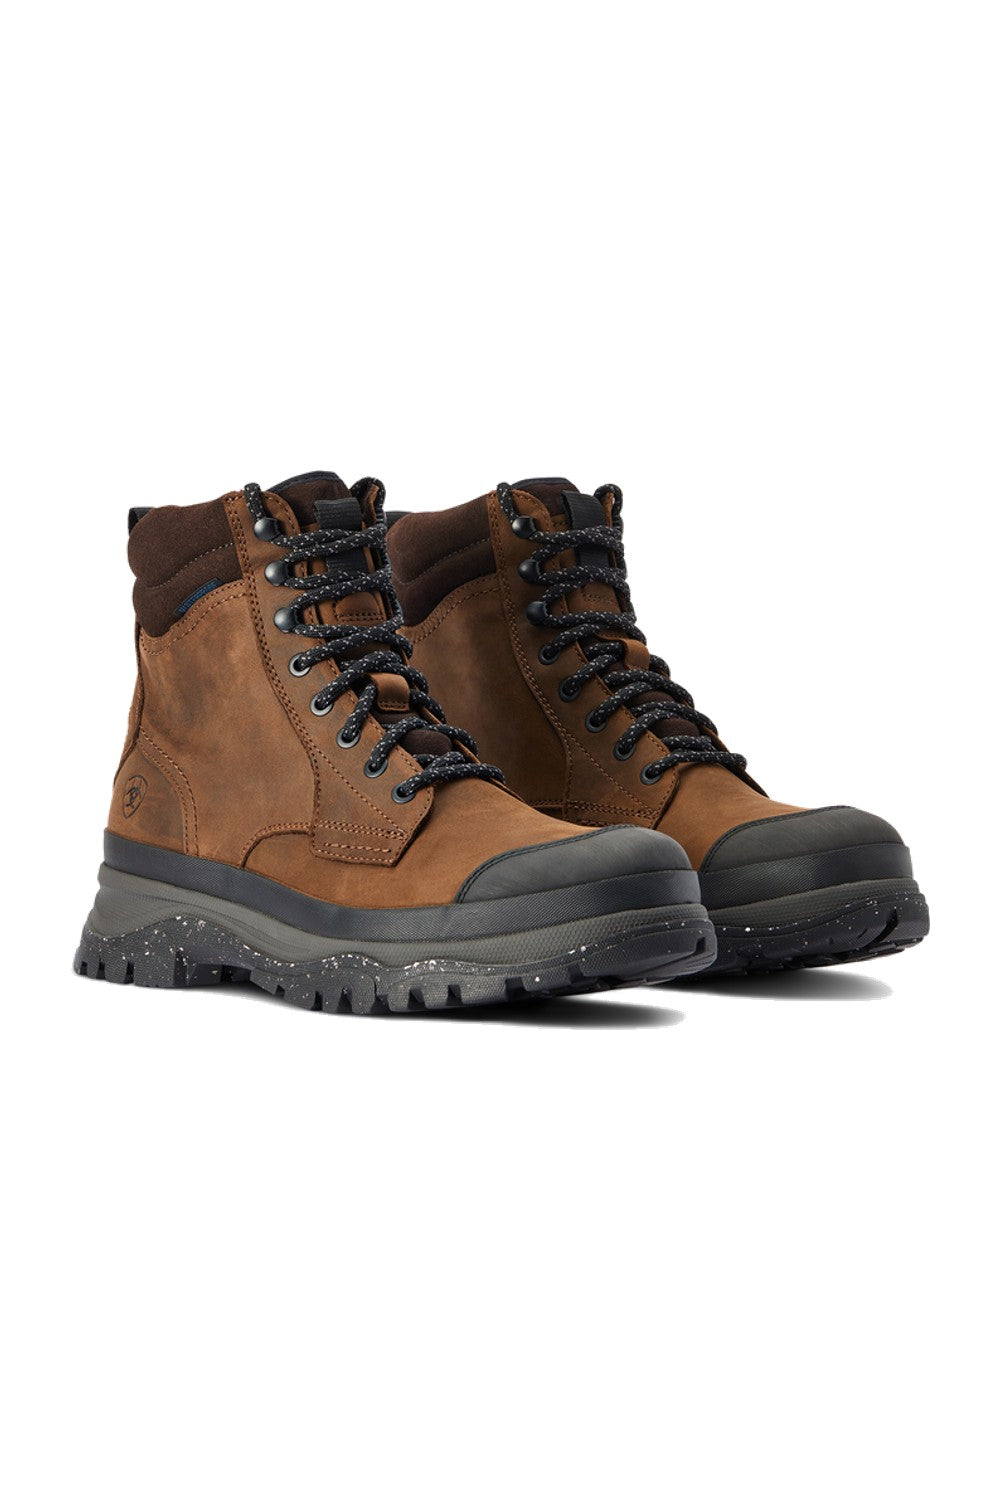 Ariat Moresby Waterproof Boots